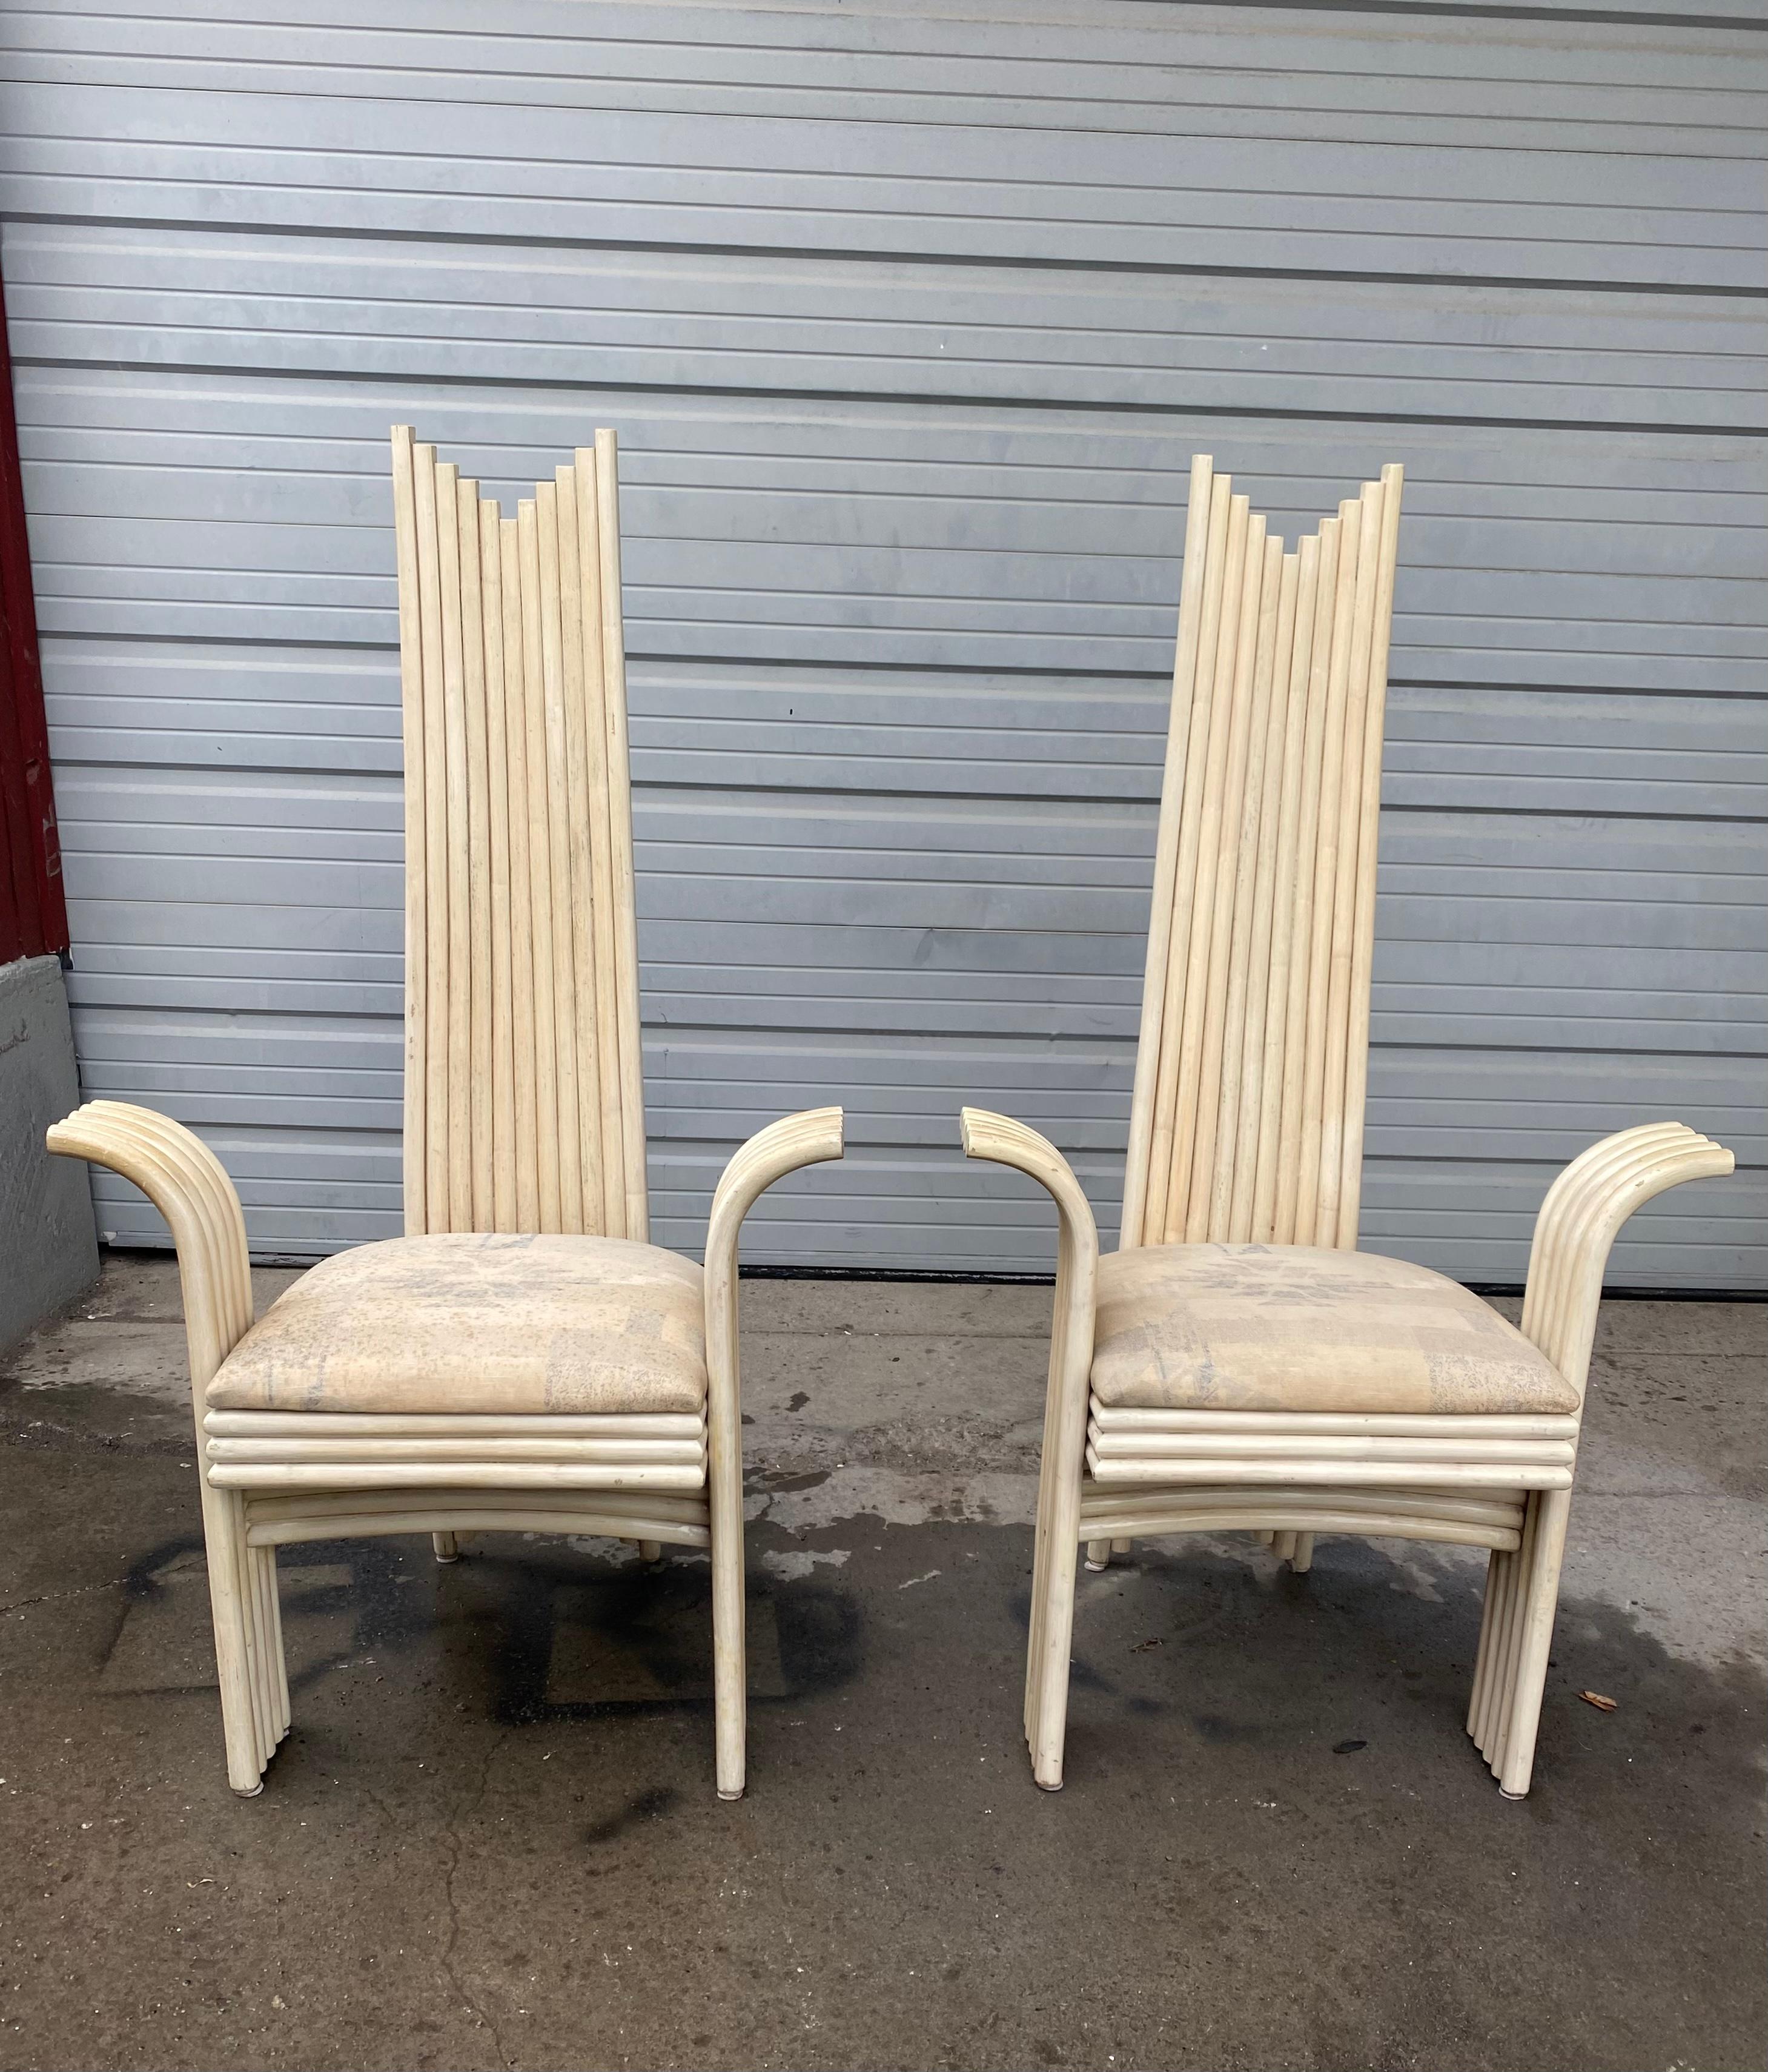 Matching Pair Curved High Back Stylized Rattan Arm Chairs,
Attributed to Danny Ho Fong (Designer)
Made by Mcguire,, seats in need of restoration.. Hand Delivery avail to New York City or anywhere en route from Buffalo NY.